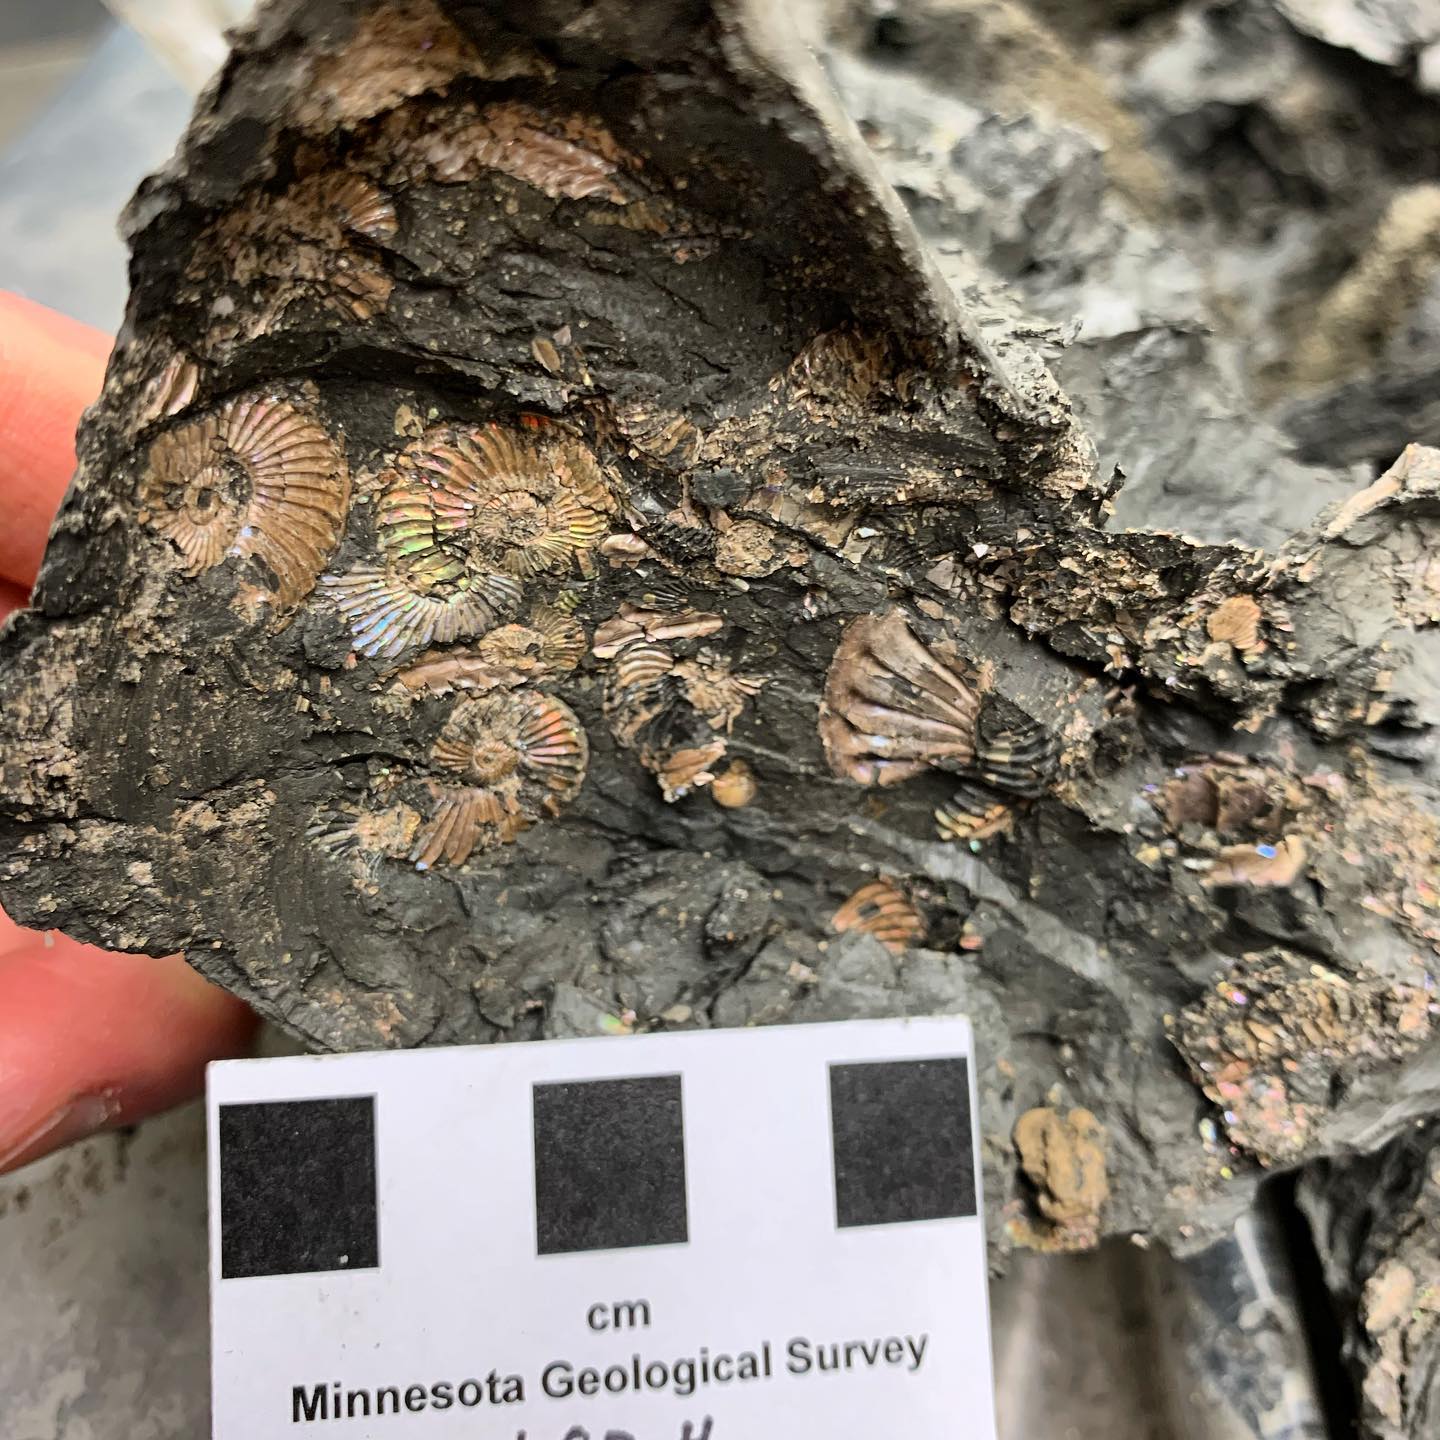 Cretaceous fossil ammonites from a core sample in Lac Qui Parle County.